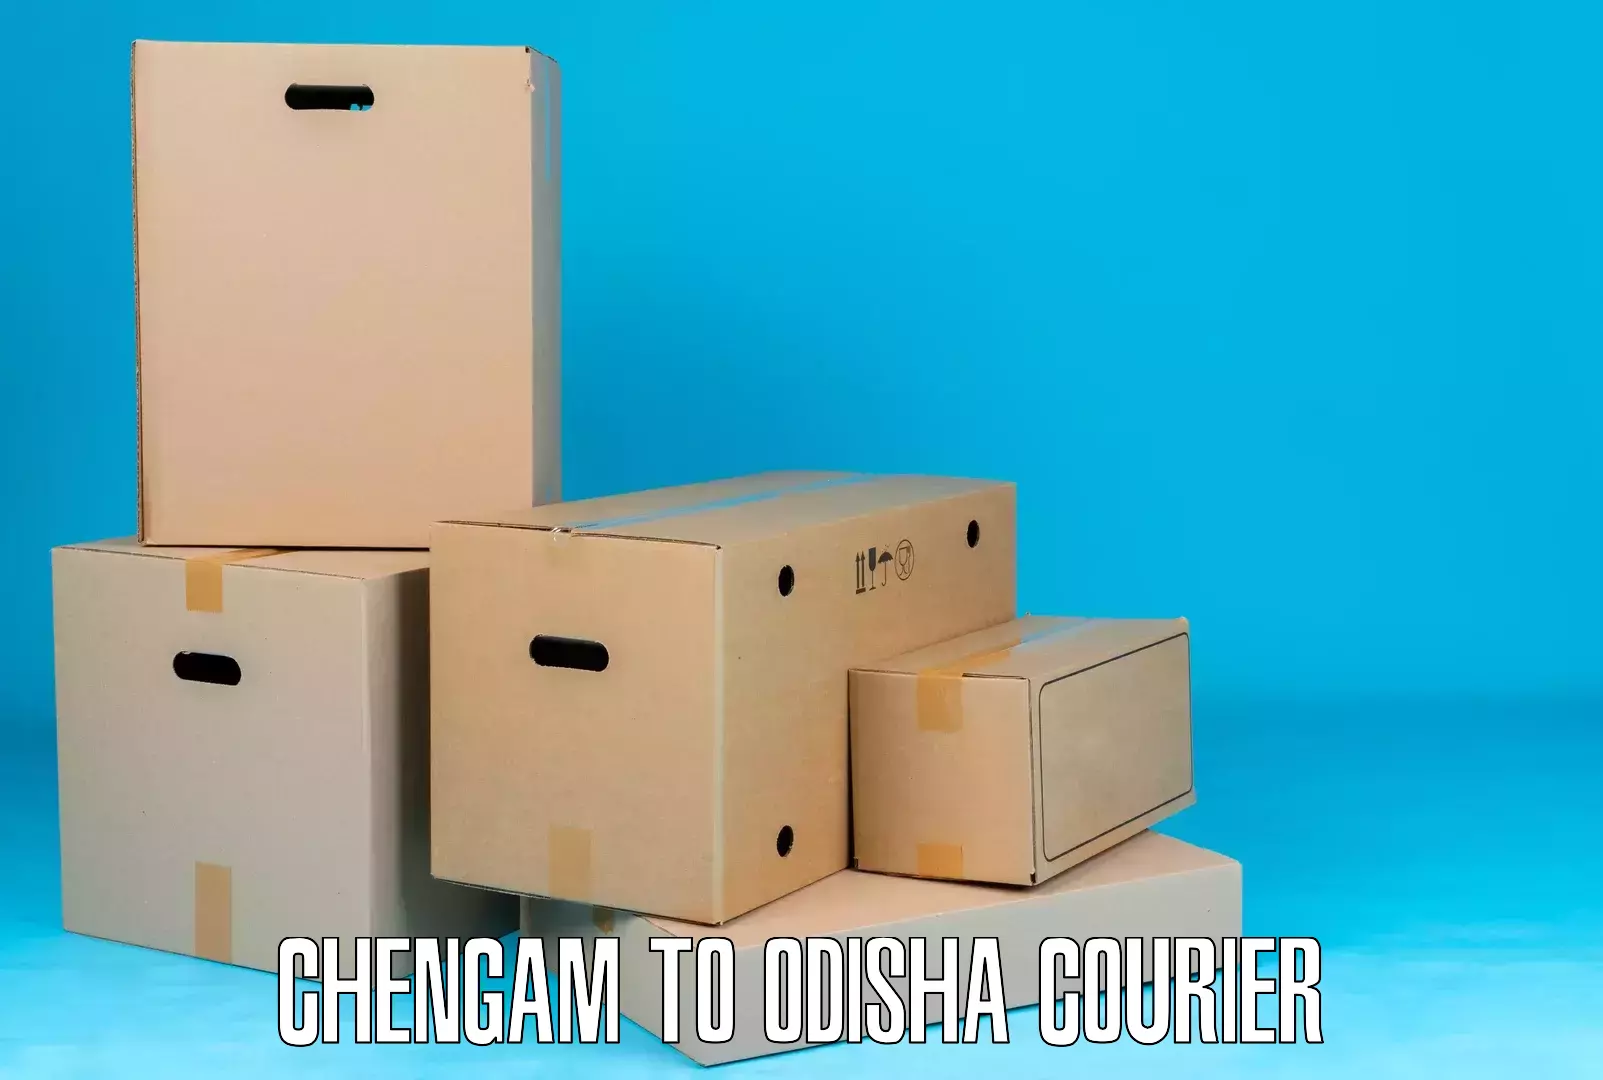 Courier service innovation in Chengam to Joda